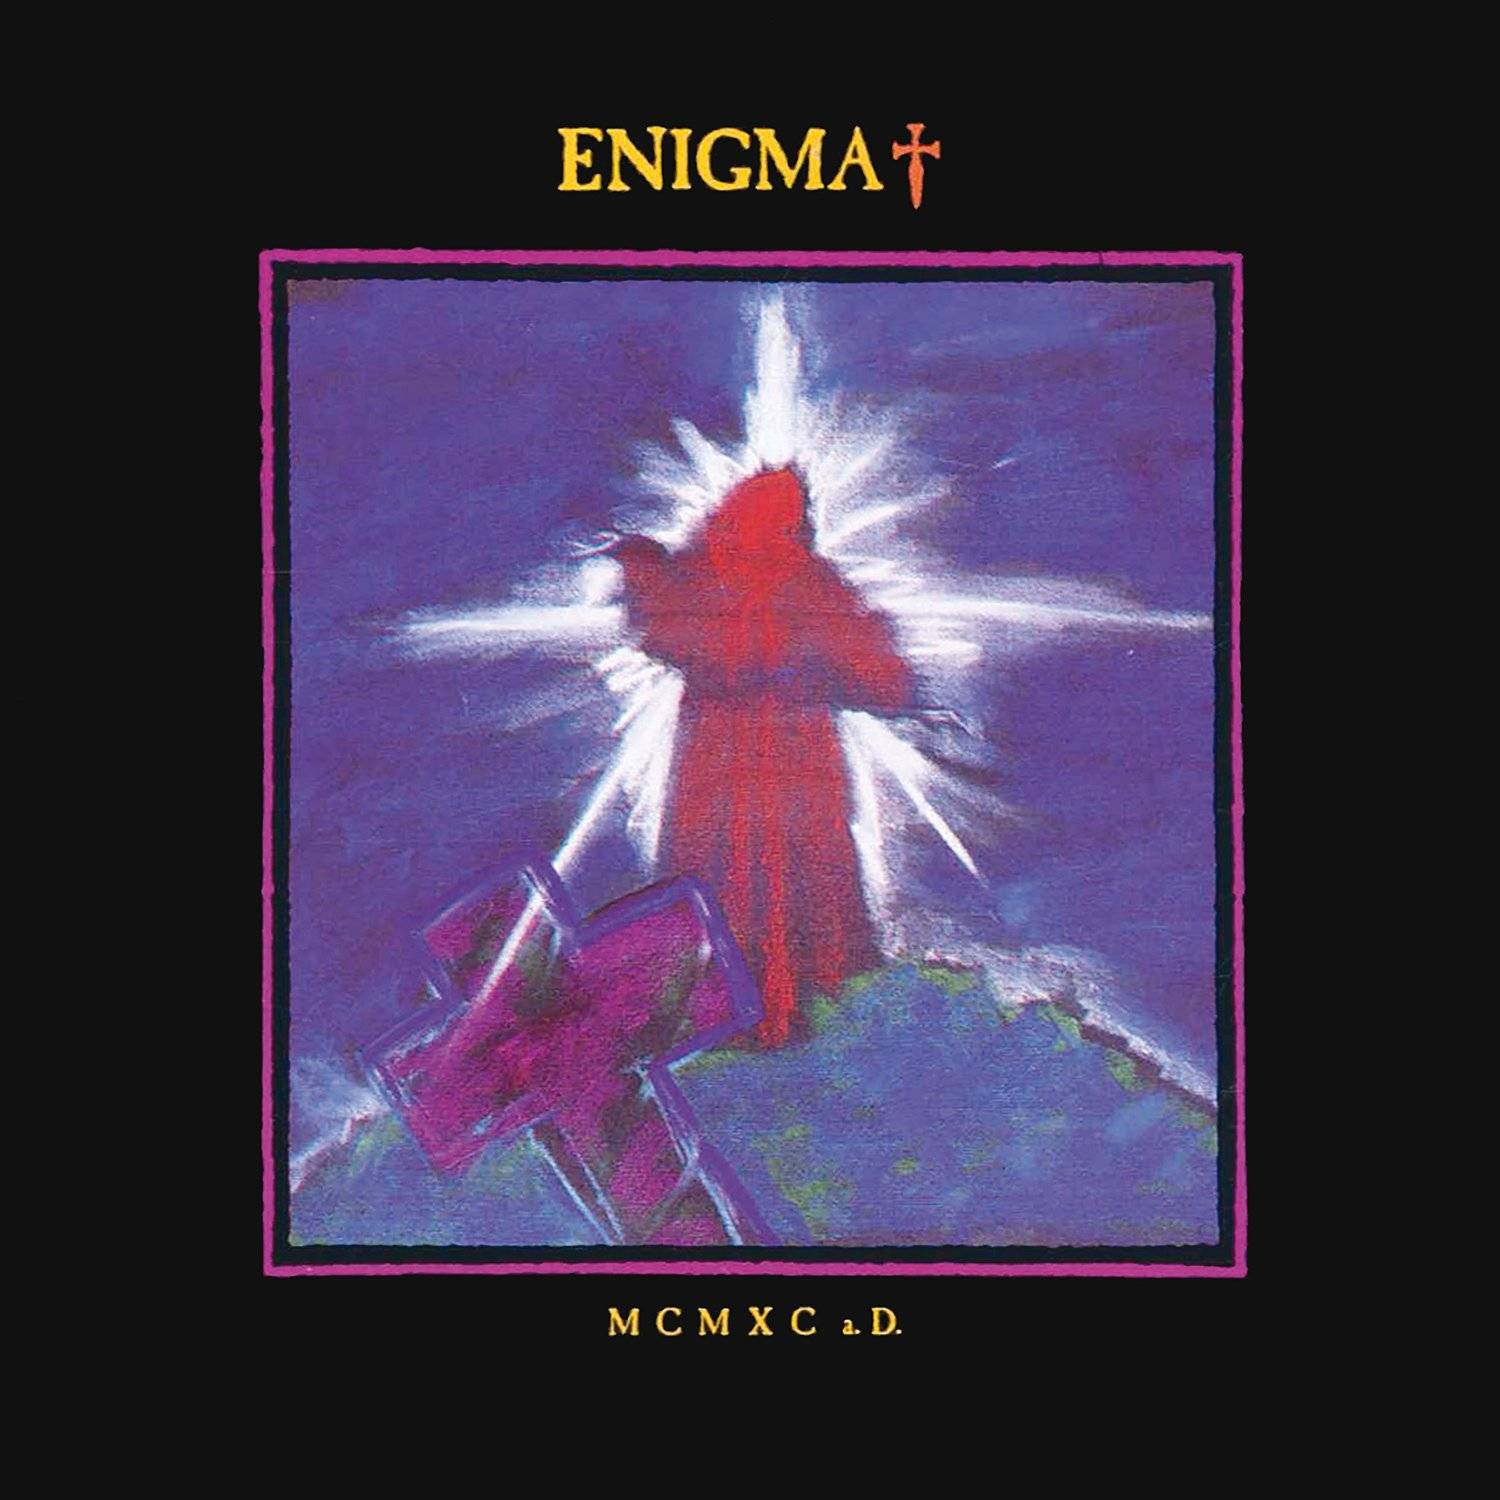 Enigma – MCMXC A.D. (1990) [Reissue 2016] SACD ISO + DSF DSD64 + Hi-Res FLAC